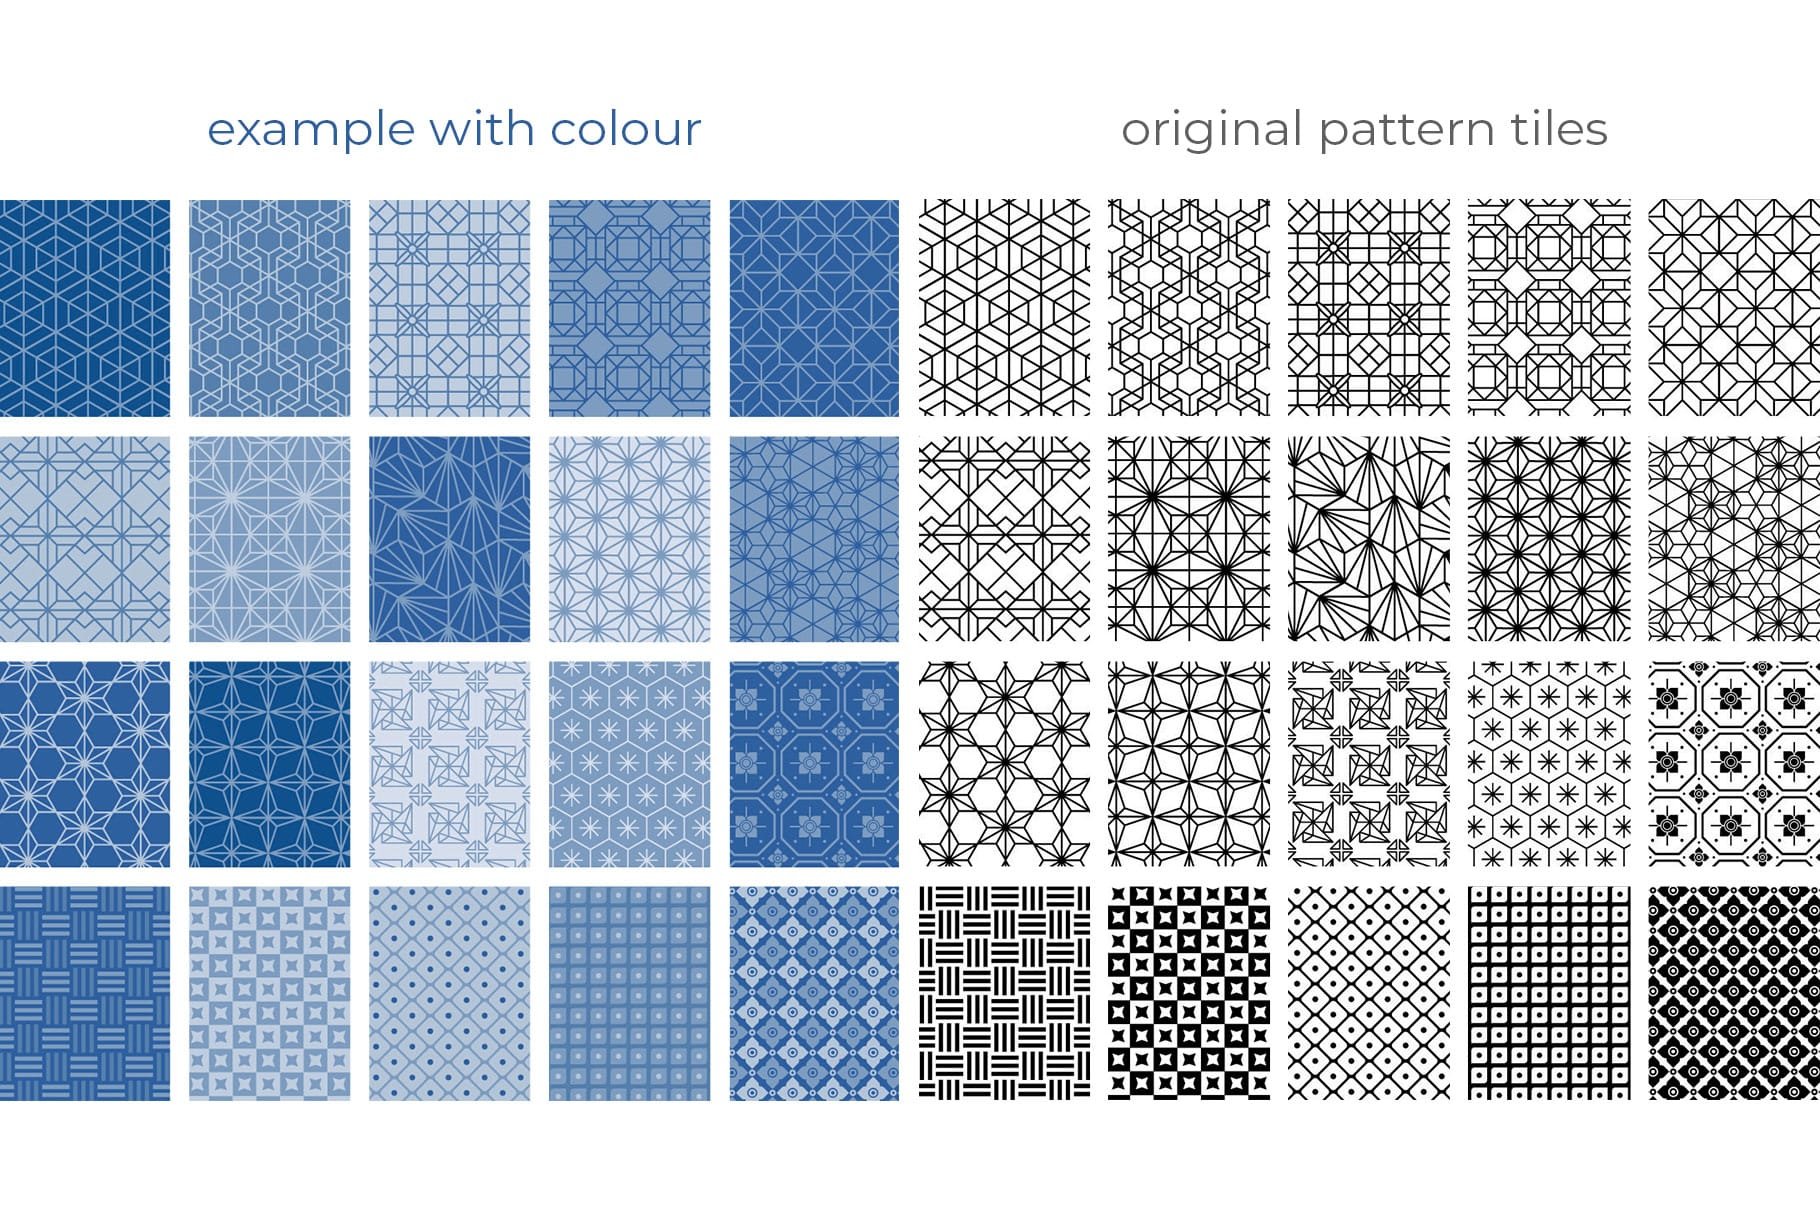 There are so many pattern examples.